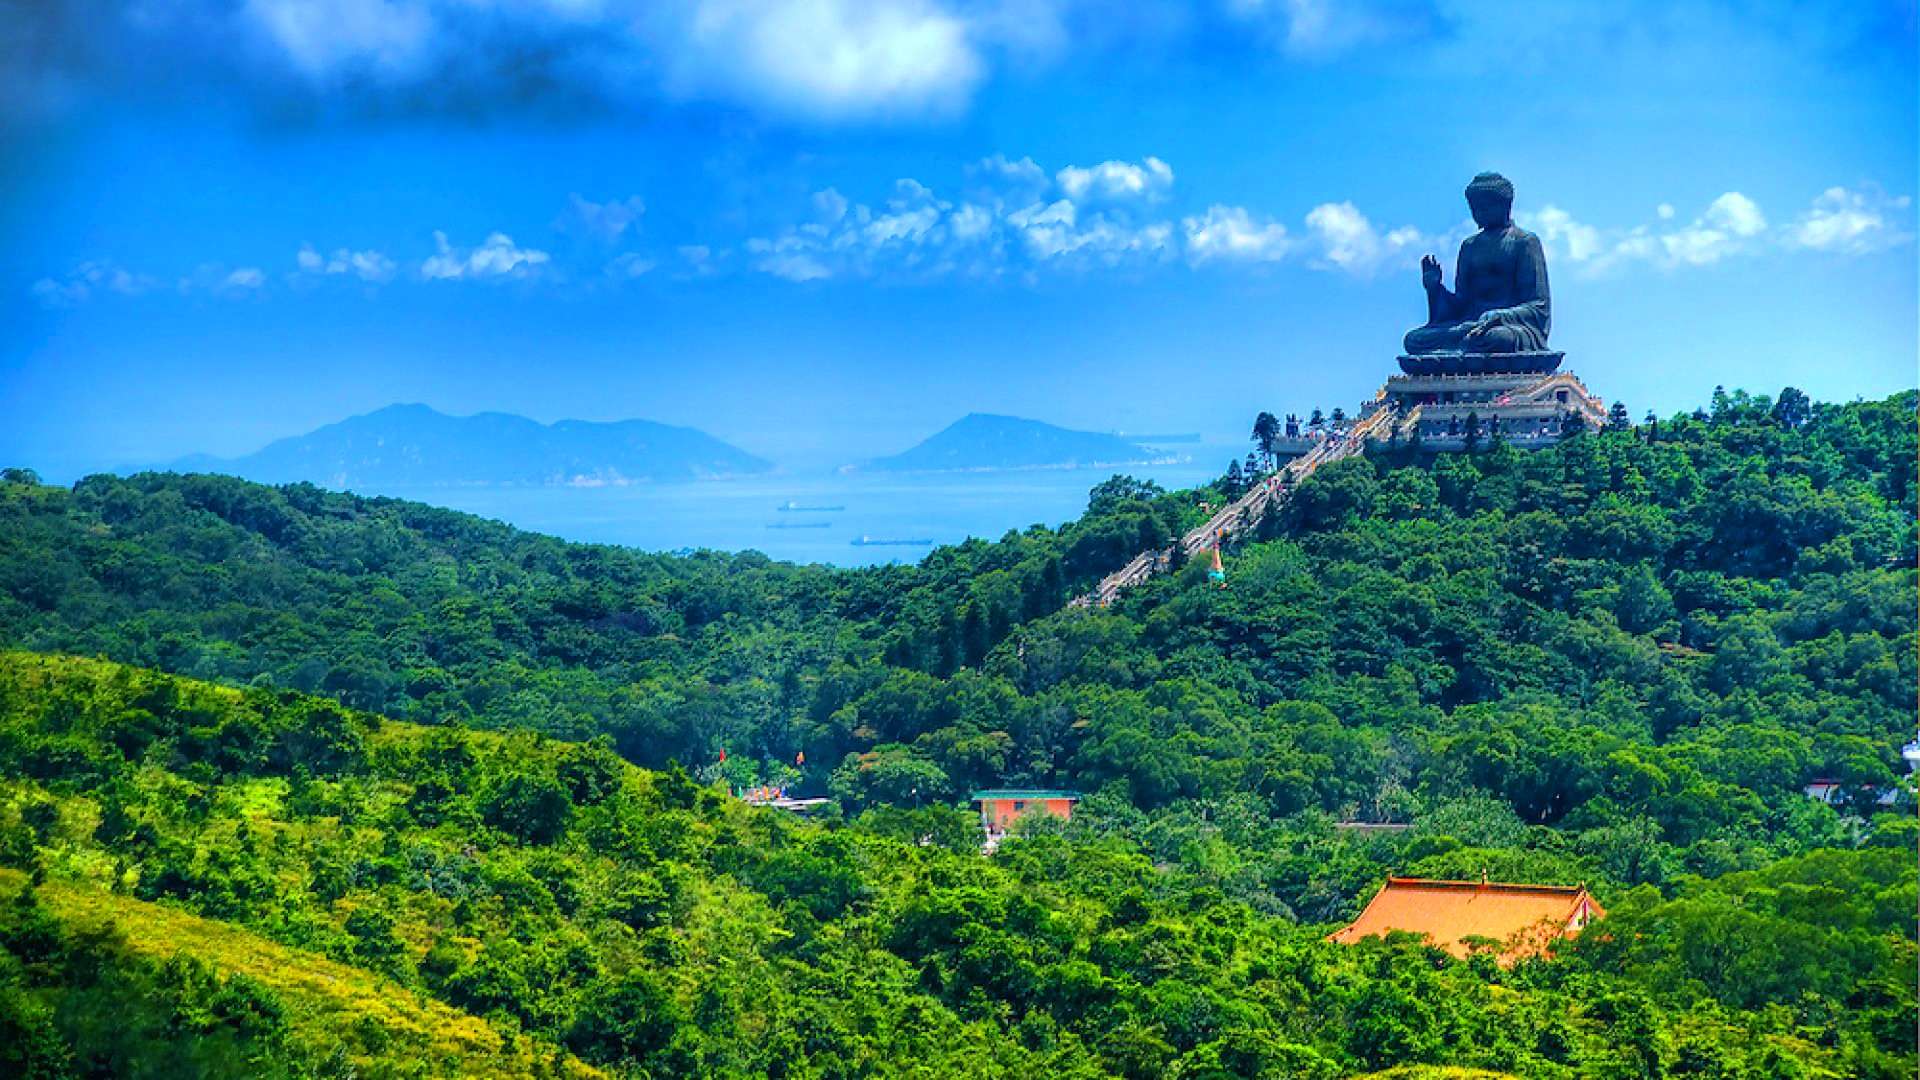 Hong Kong Too Crowded For Your Comfort Explore Lantau Island On The ...